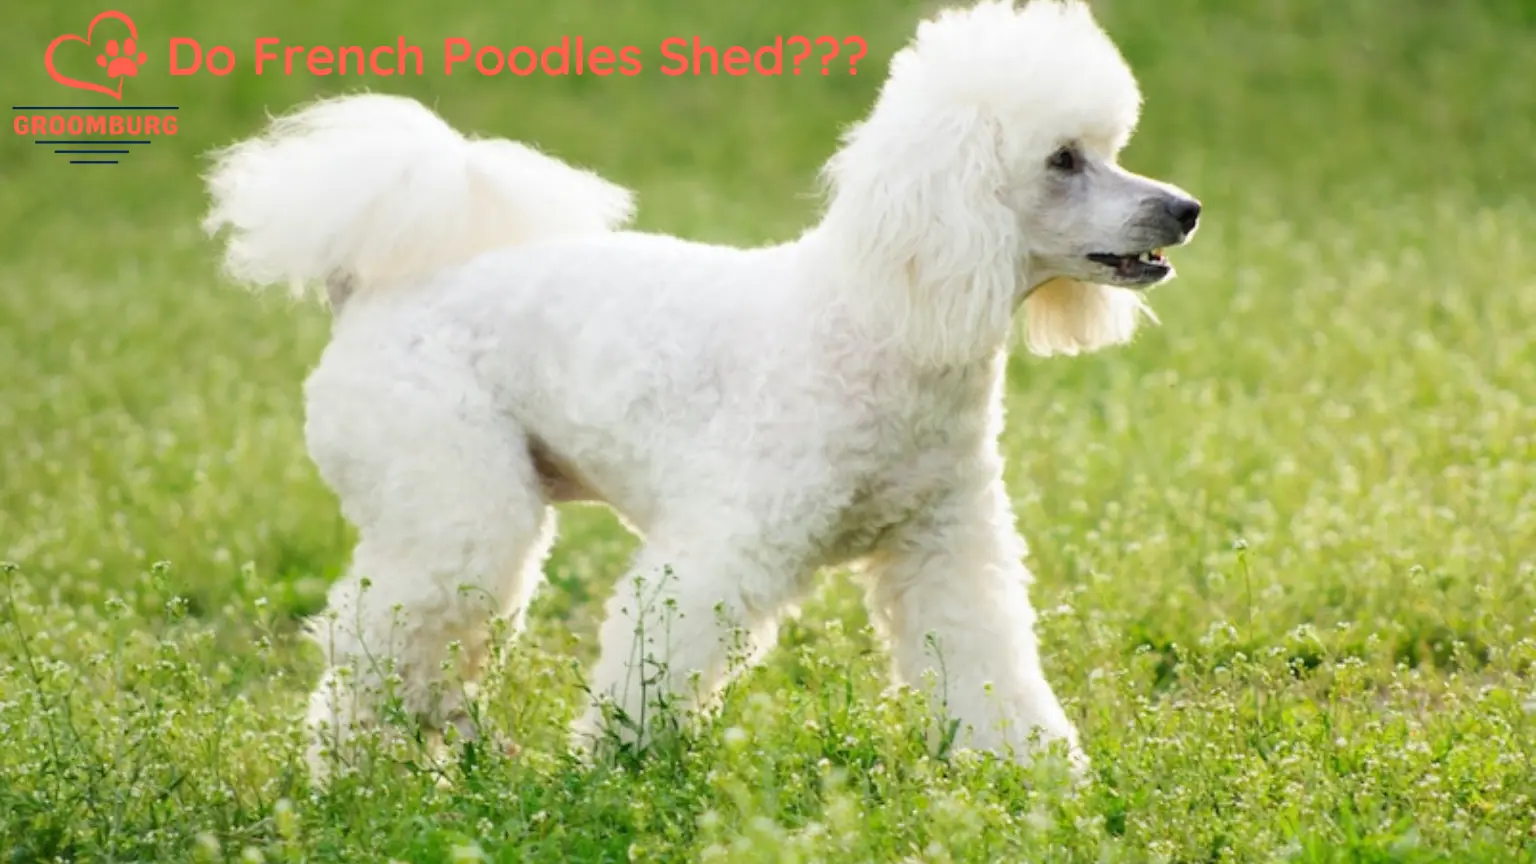 Do French Poodles Shed?